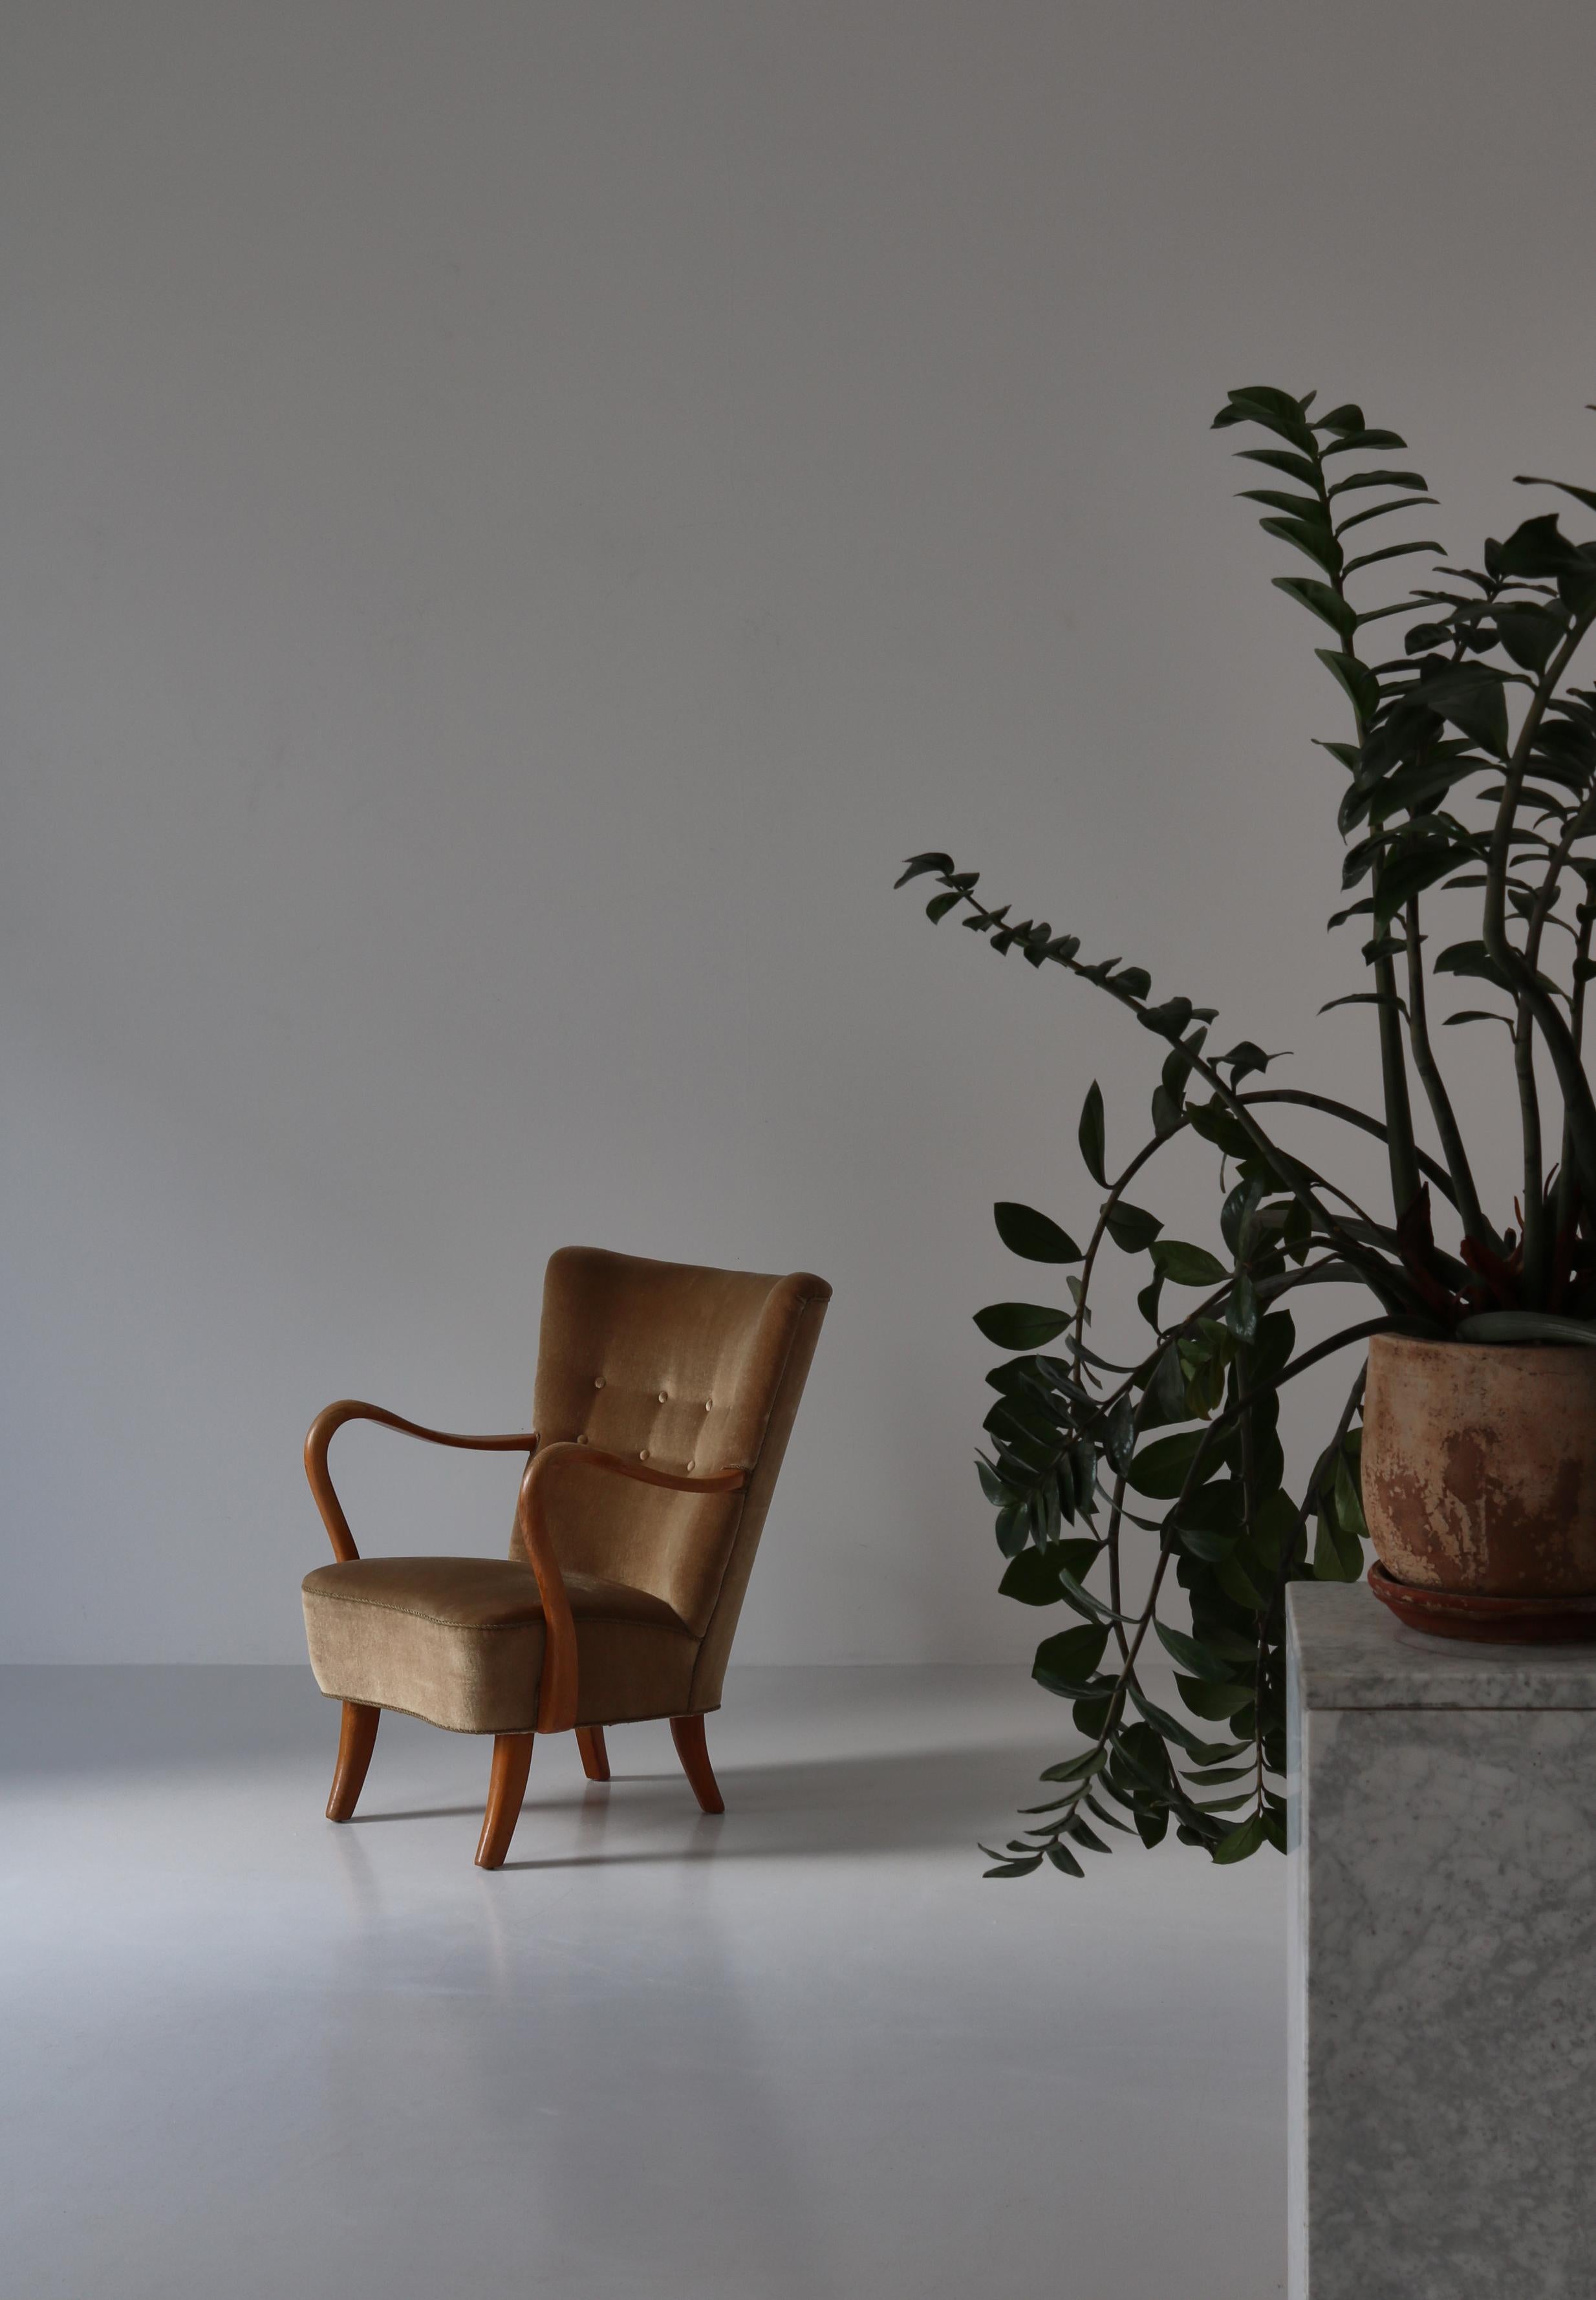 Easy chair by designed by Alfred Christensen in the early 1950s and manufactured by Slagelse Møbelværk. This stunning chair has aged beautifully and the original velvet upholstery and wood finish has the perfect patina. 

Clean and pure lines